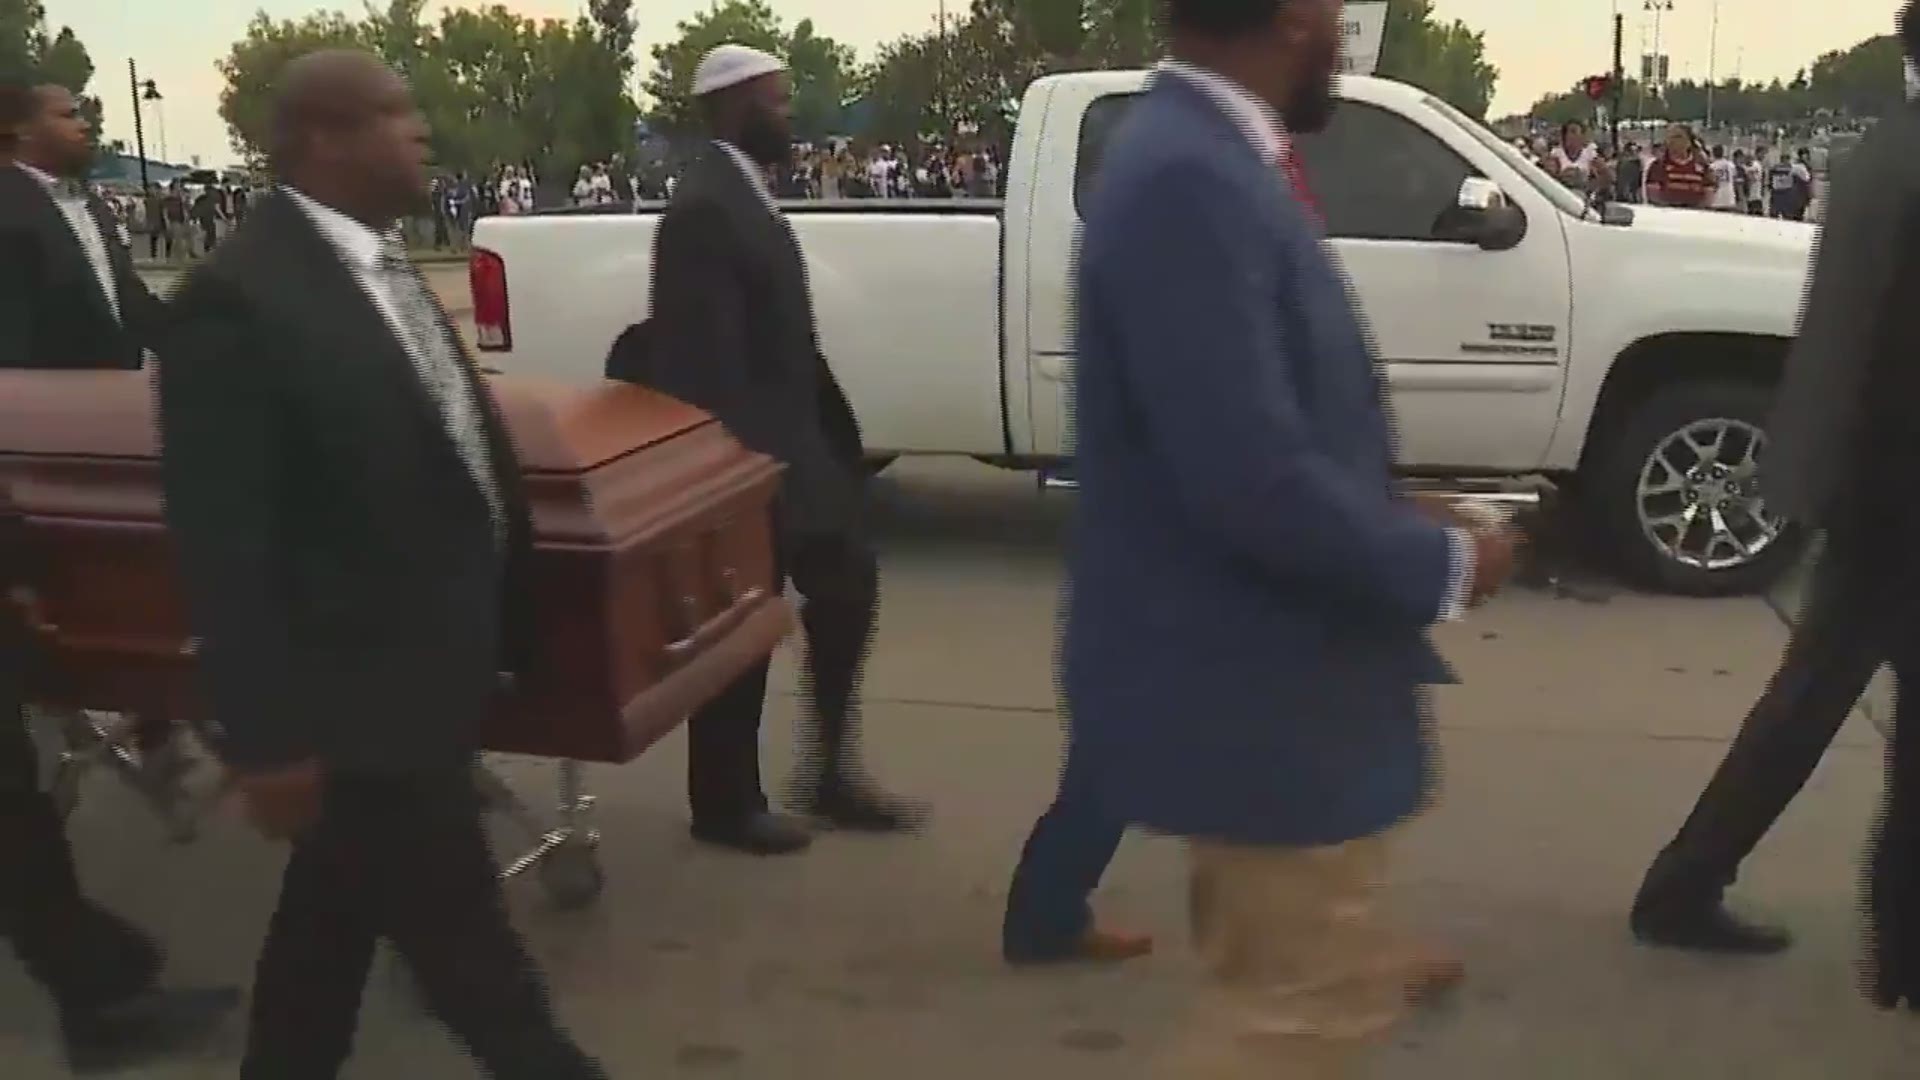 They carried a casket as a symbolic funeral procession in honor of Jean before the Cowboys-Giants game SUnday.